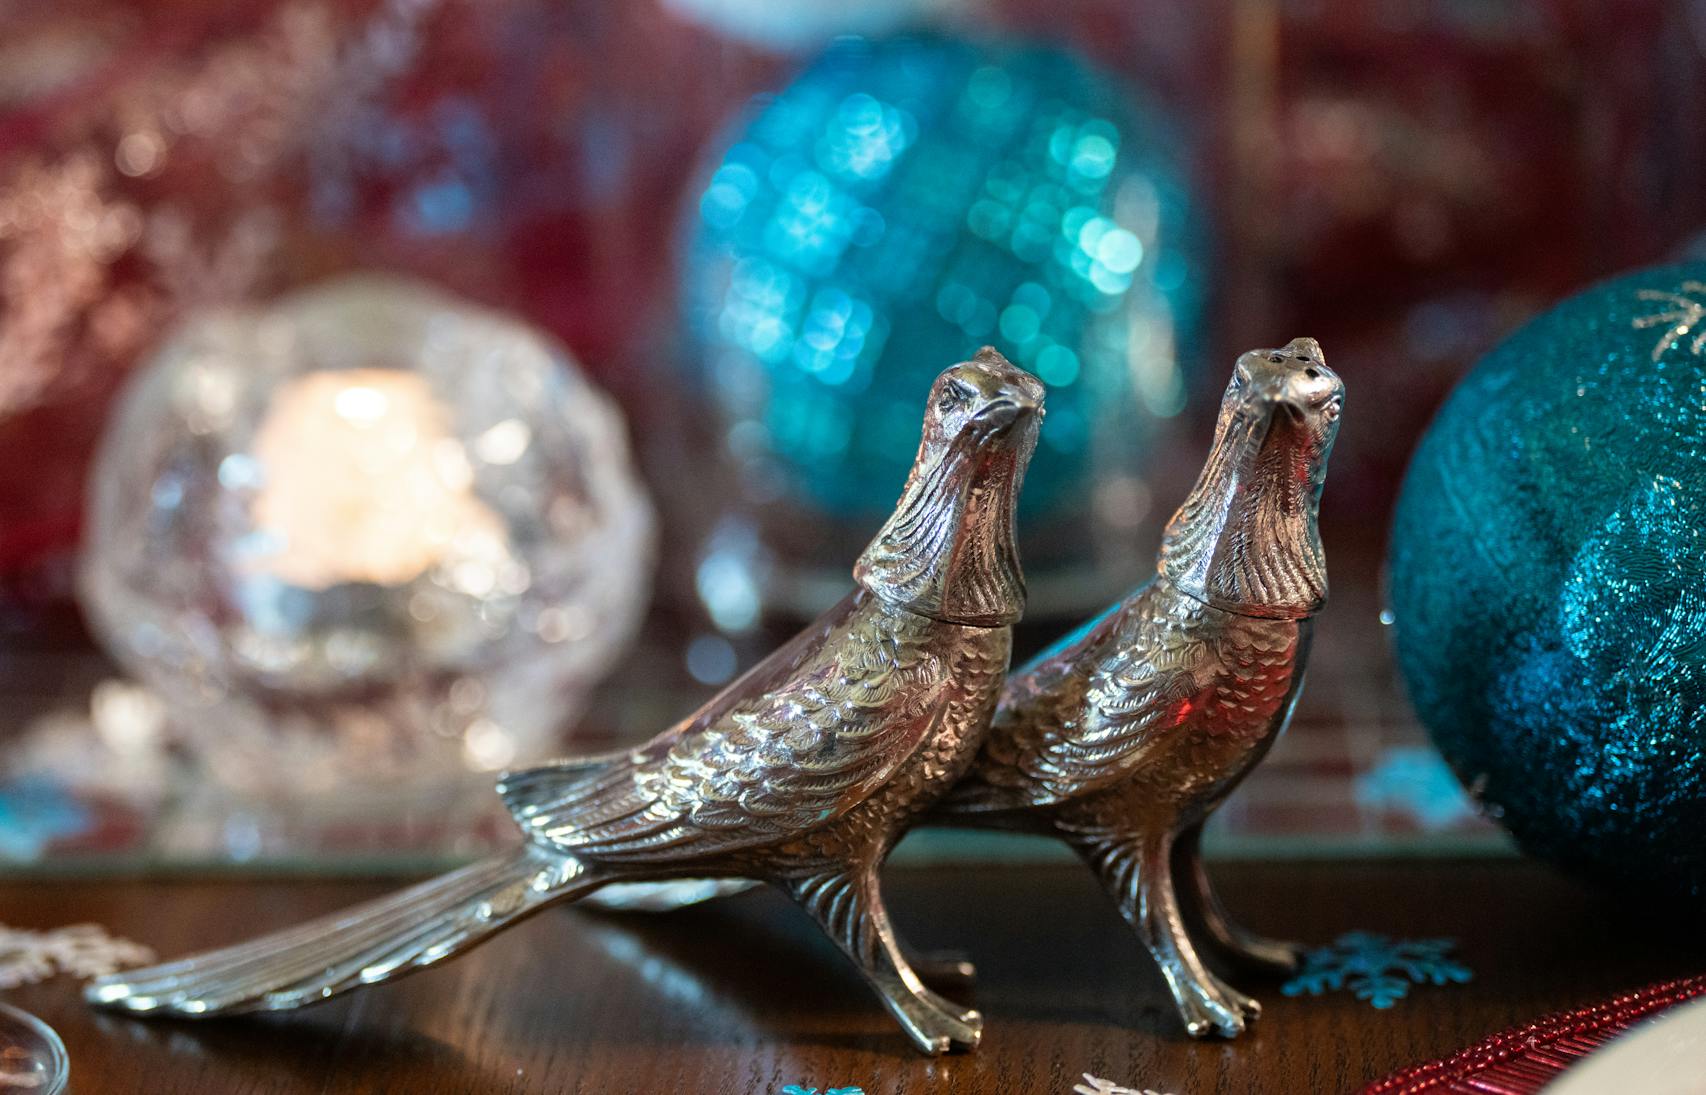 Bird Salt and pepper shakers on a holiday tablescape by Amy Leyden of Kaleidoscope Table Settings.